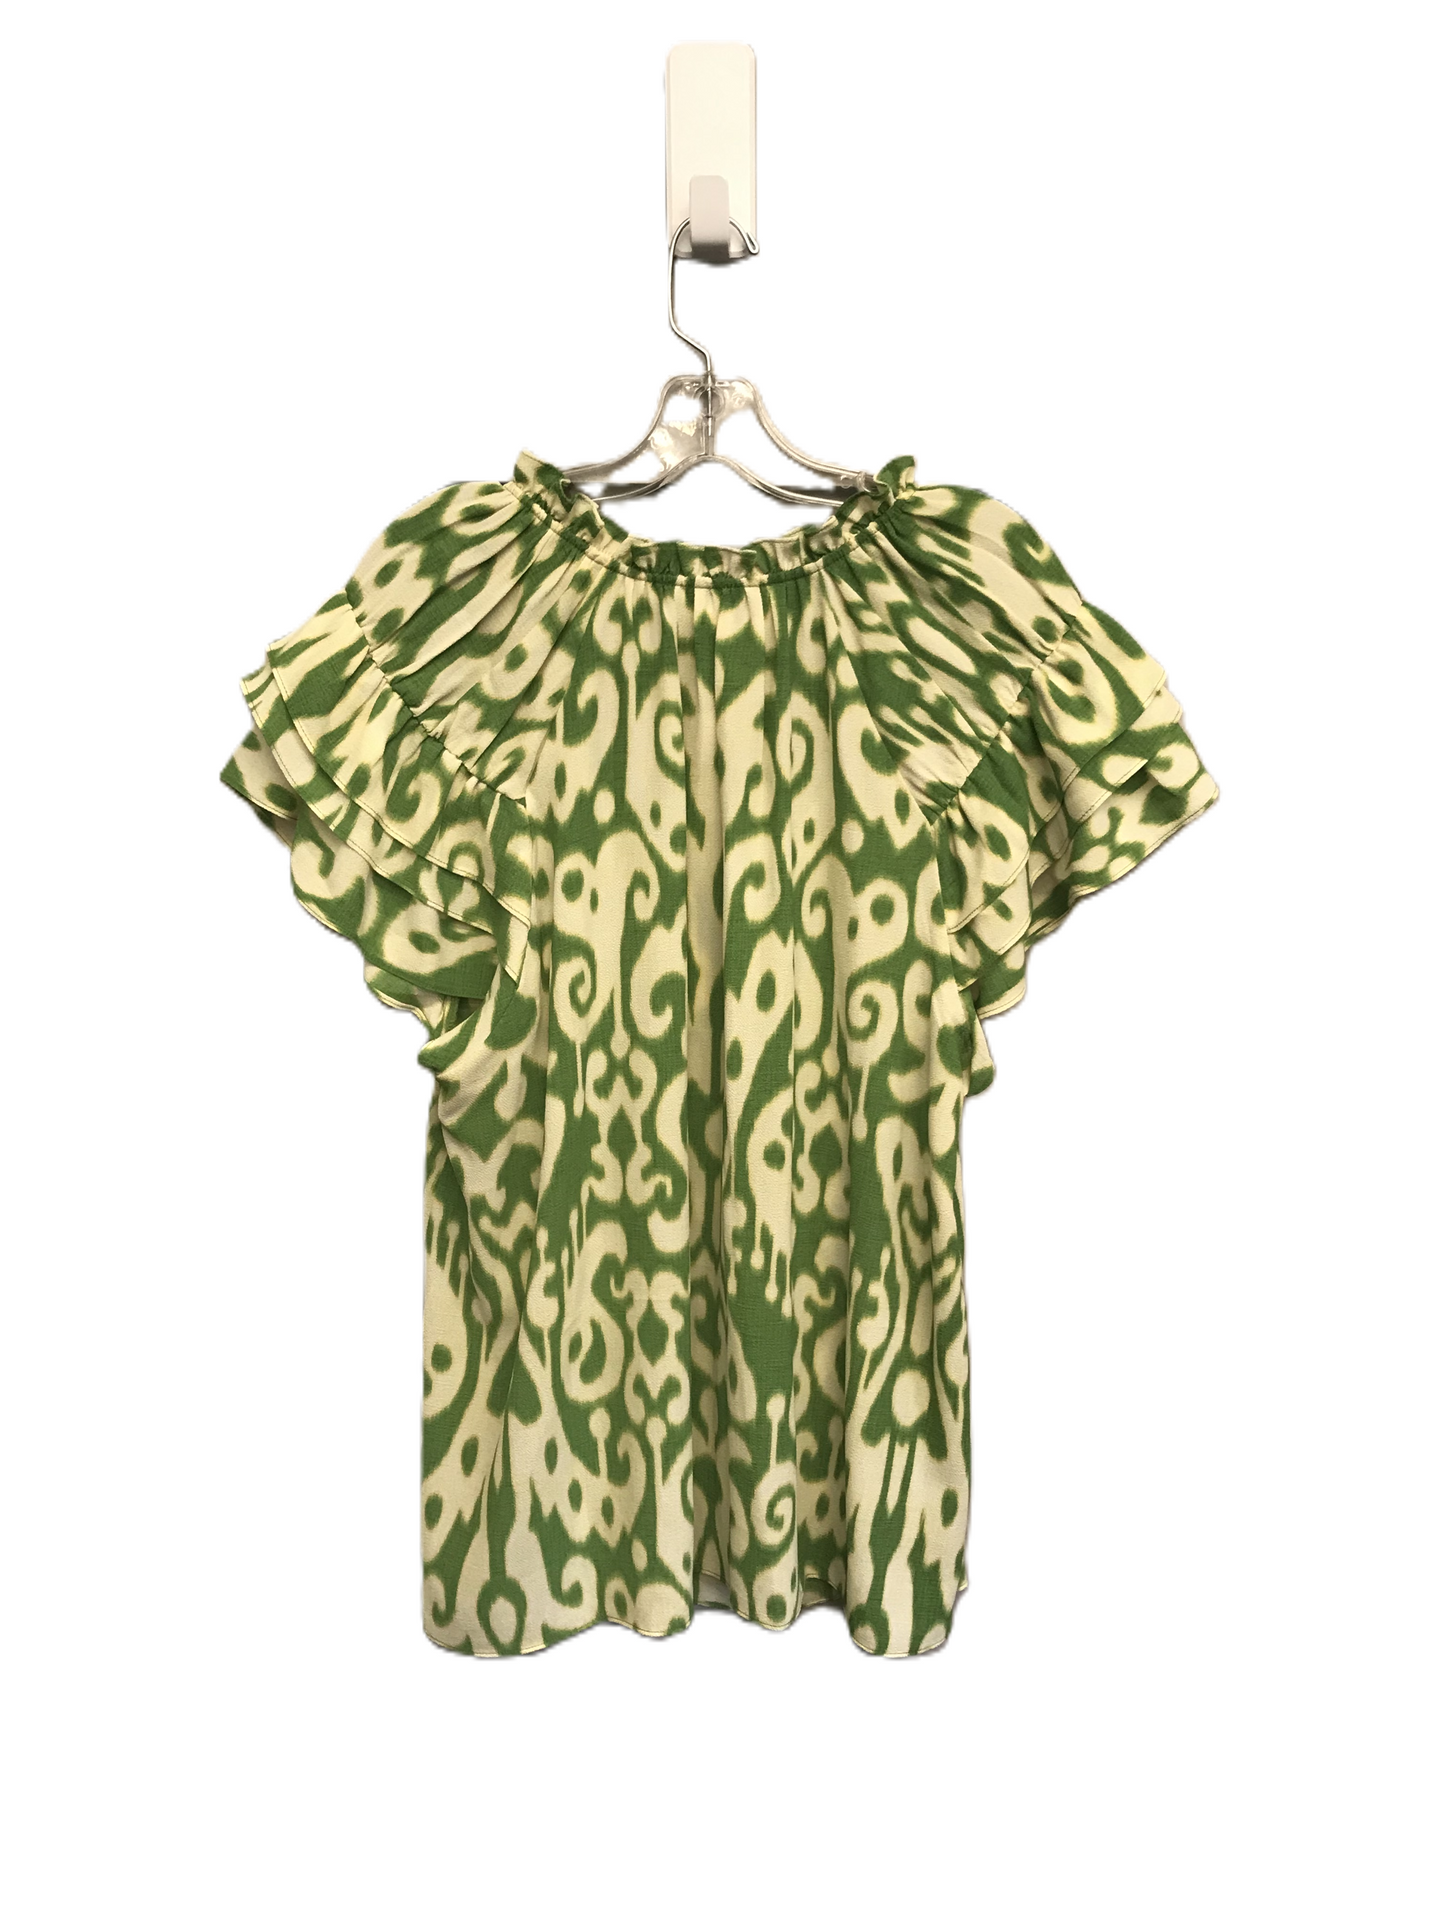 Green Top Short Sleeve By Rose And Olive, Size: 1x